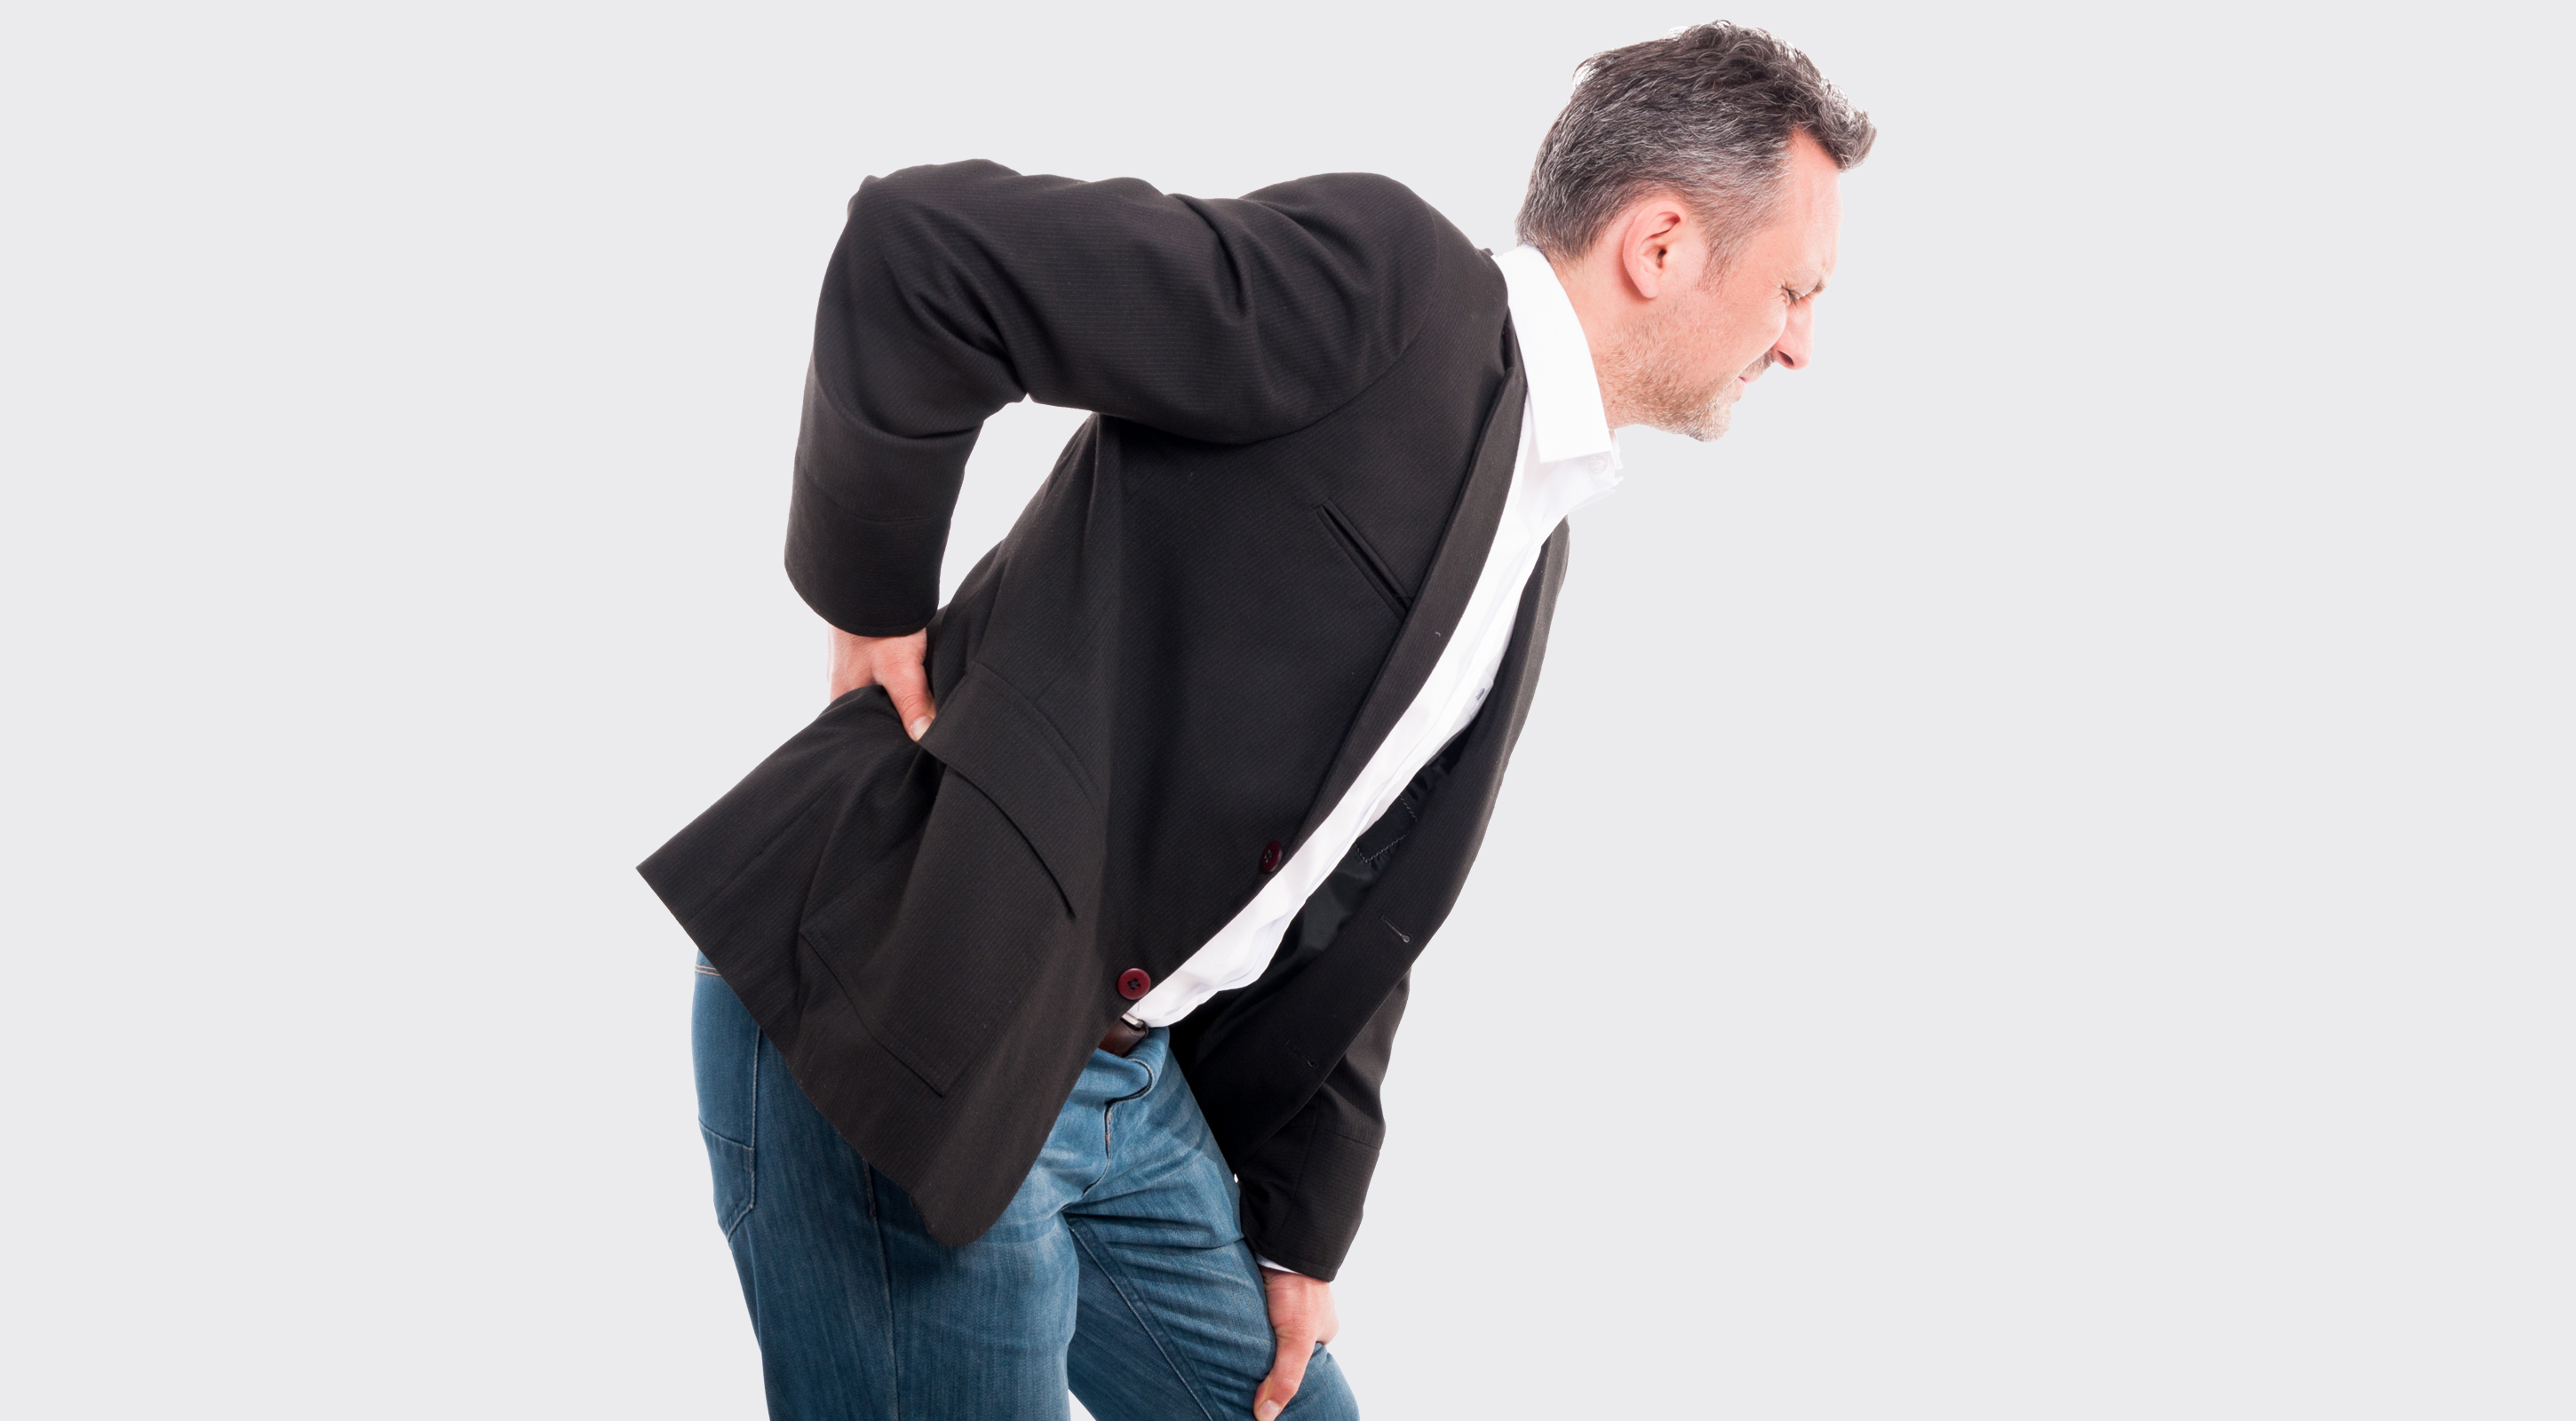 New Roads back pain contained with chiropractic care 